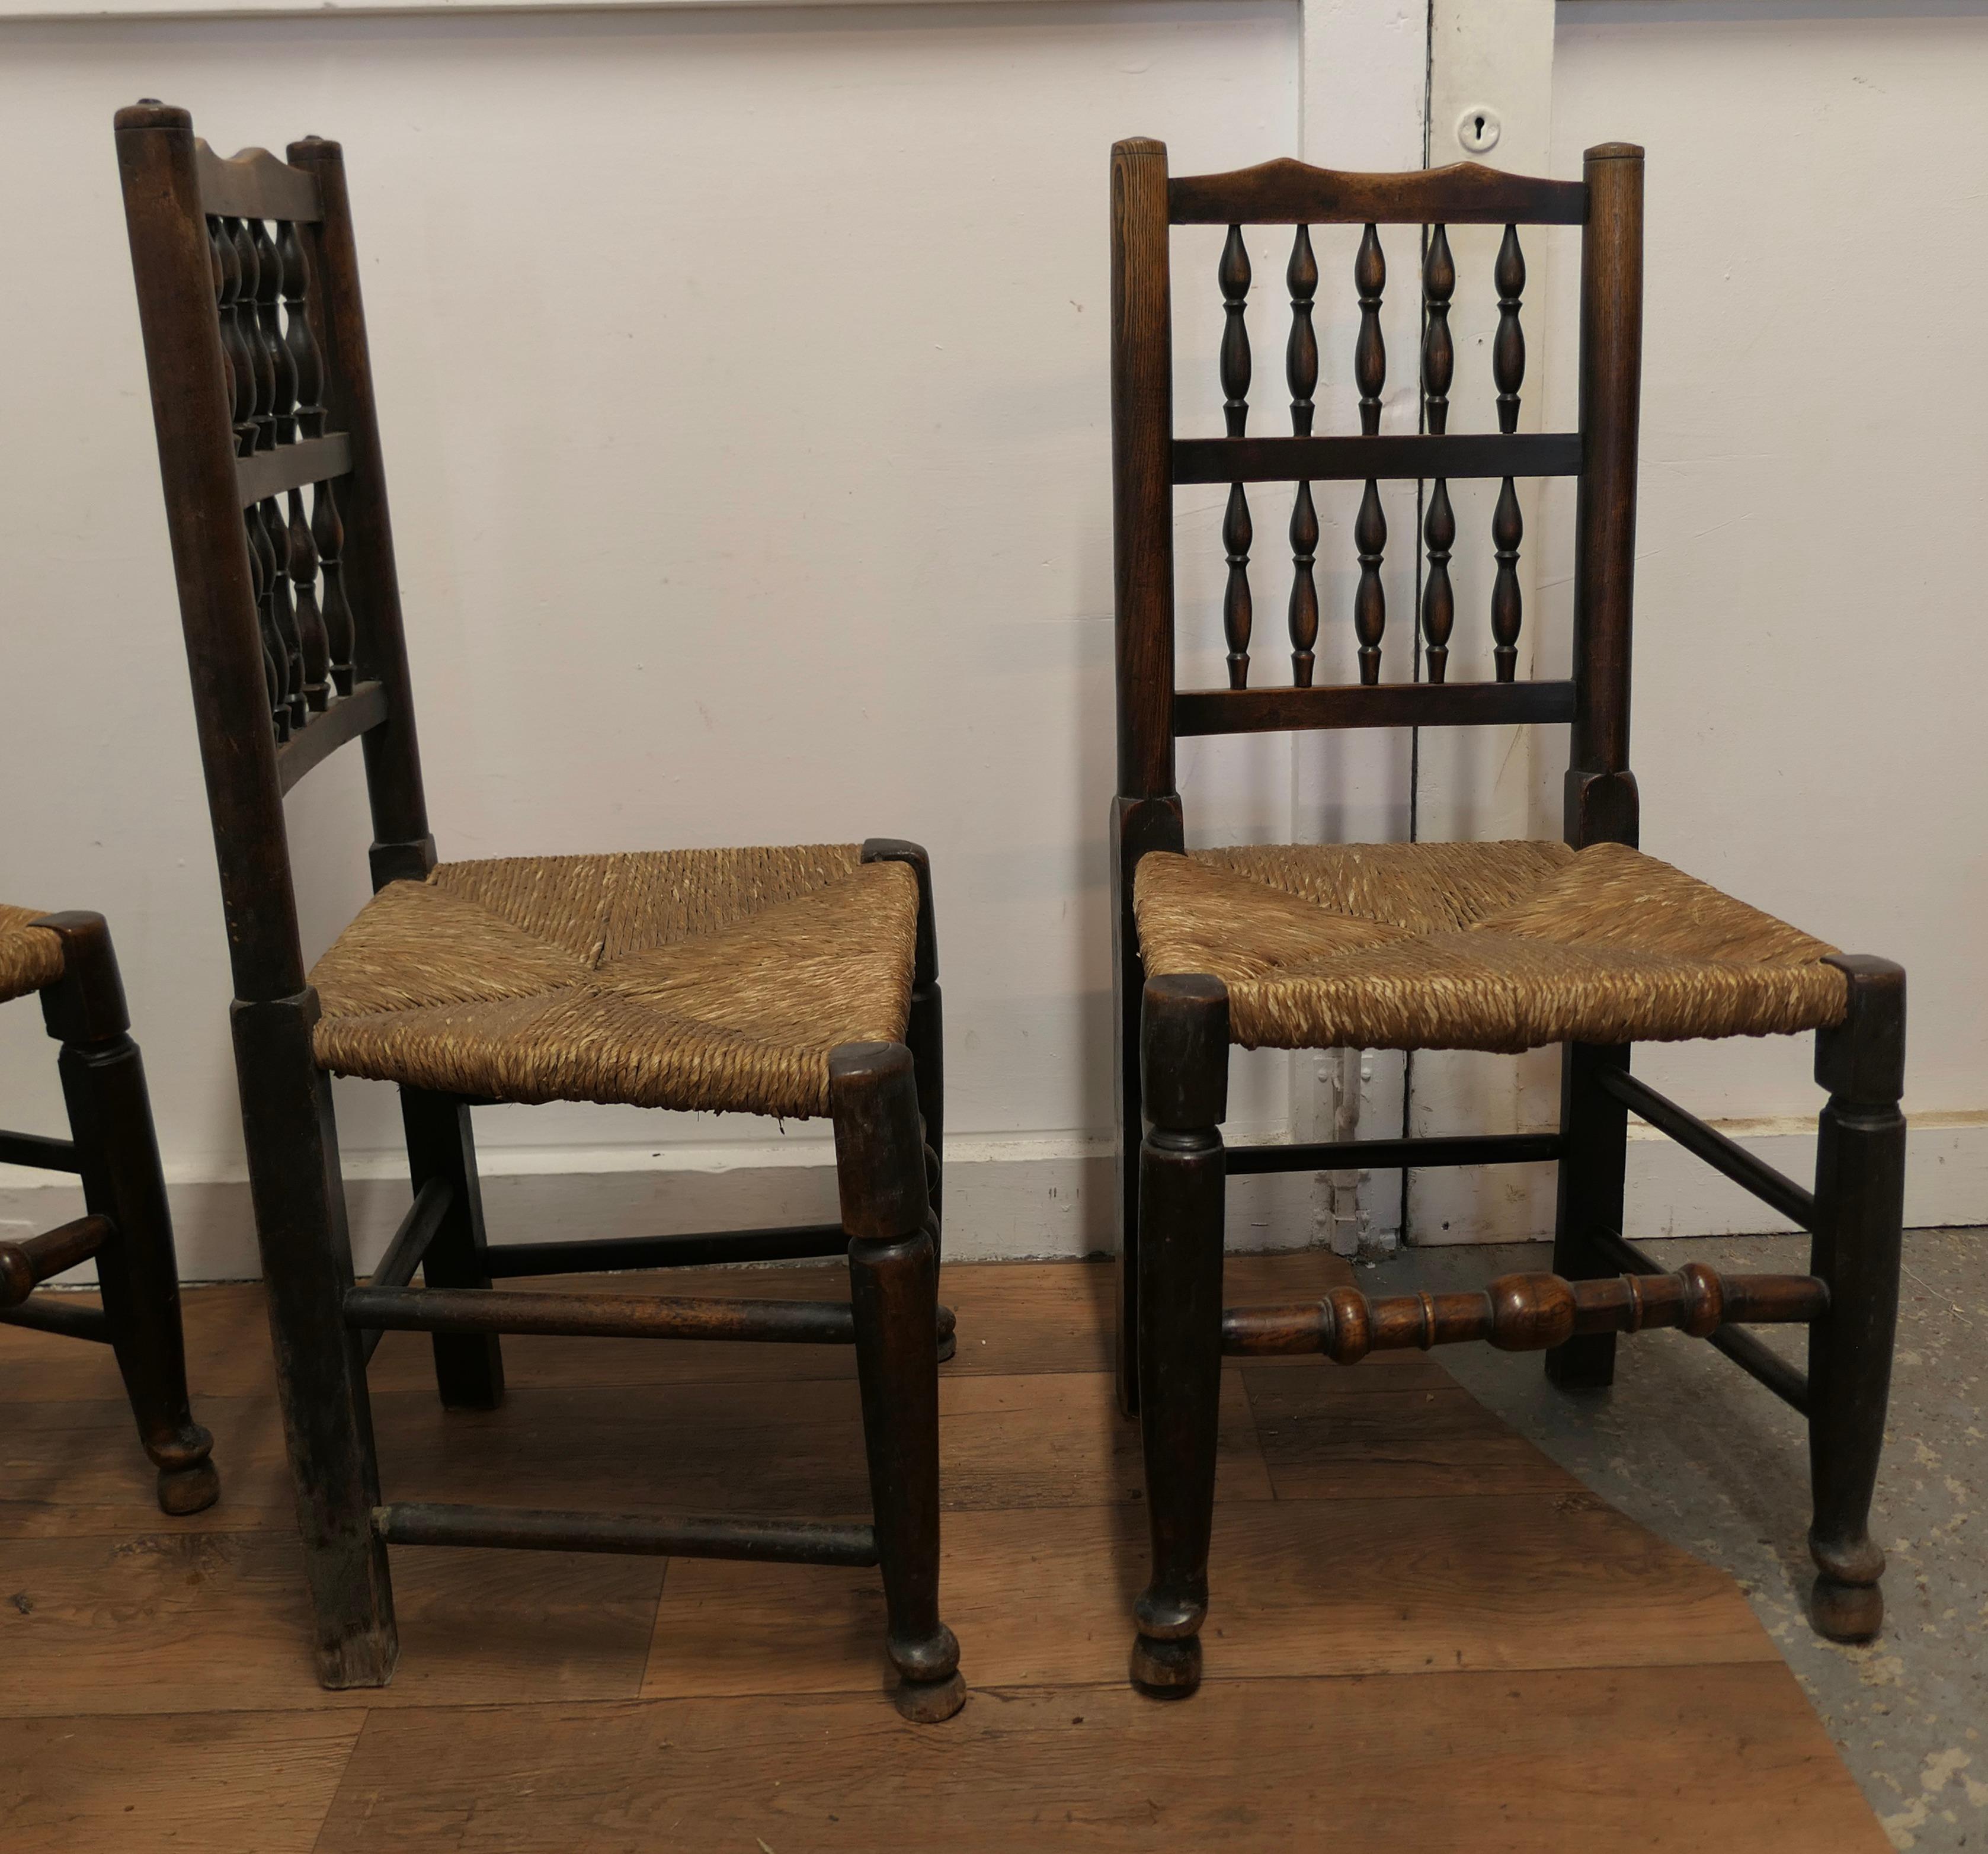 A Set of 4 Lancashire Spindle Back Farmhouse Kitchen Dining Chairs   In Good Condition For Sale In Chillerton, Isle of Wight